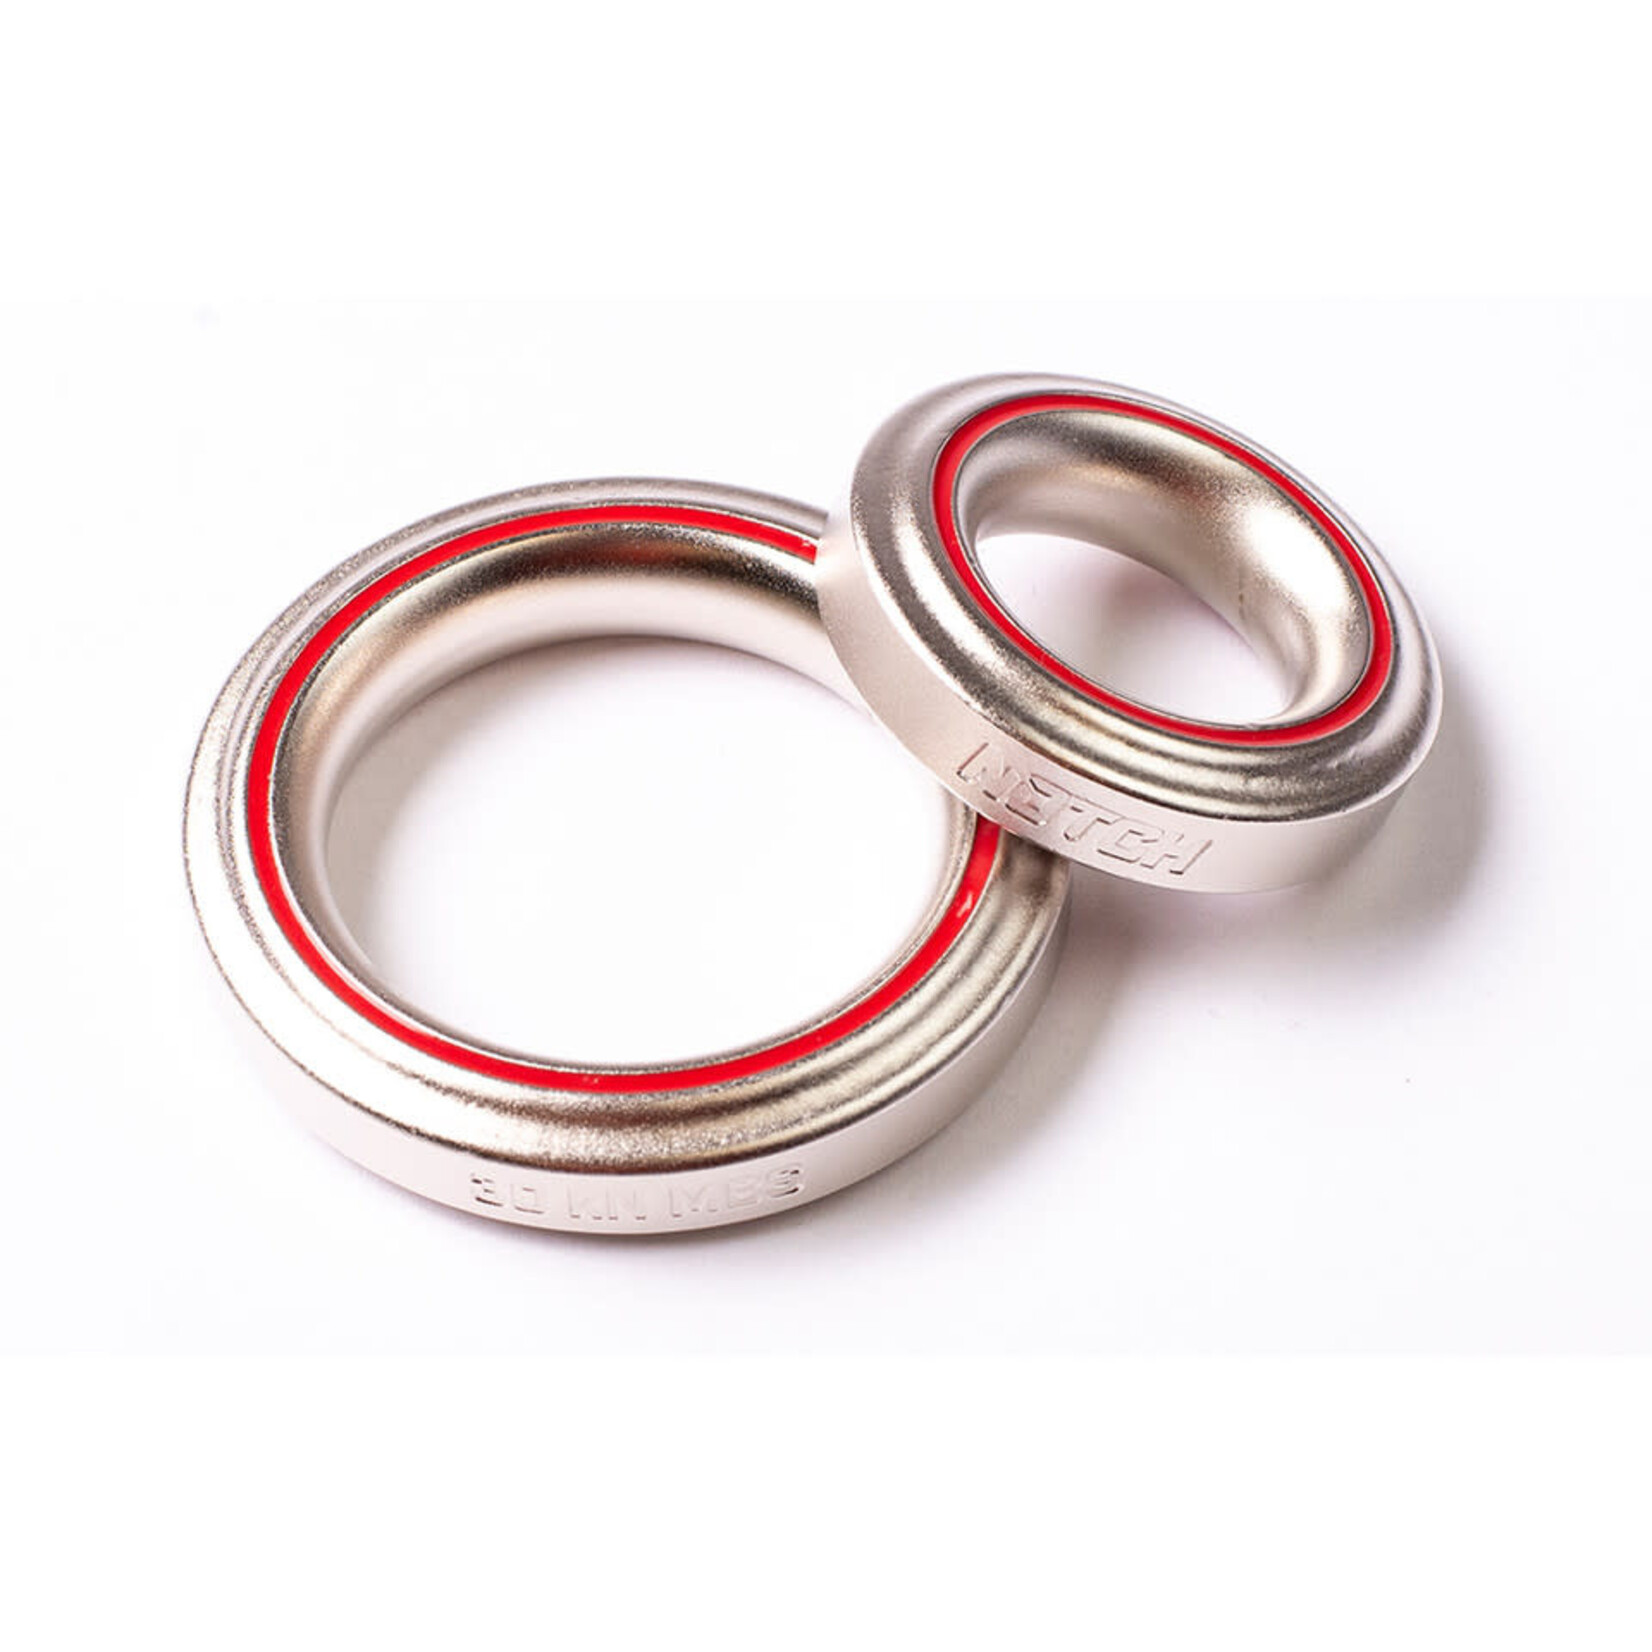 Notch Equipment Notch Wear Safe Steel Friction Ring (Small - 28x52mm)